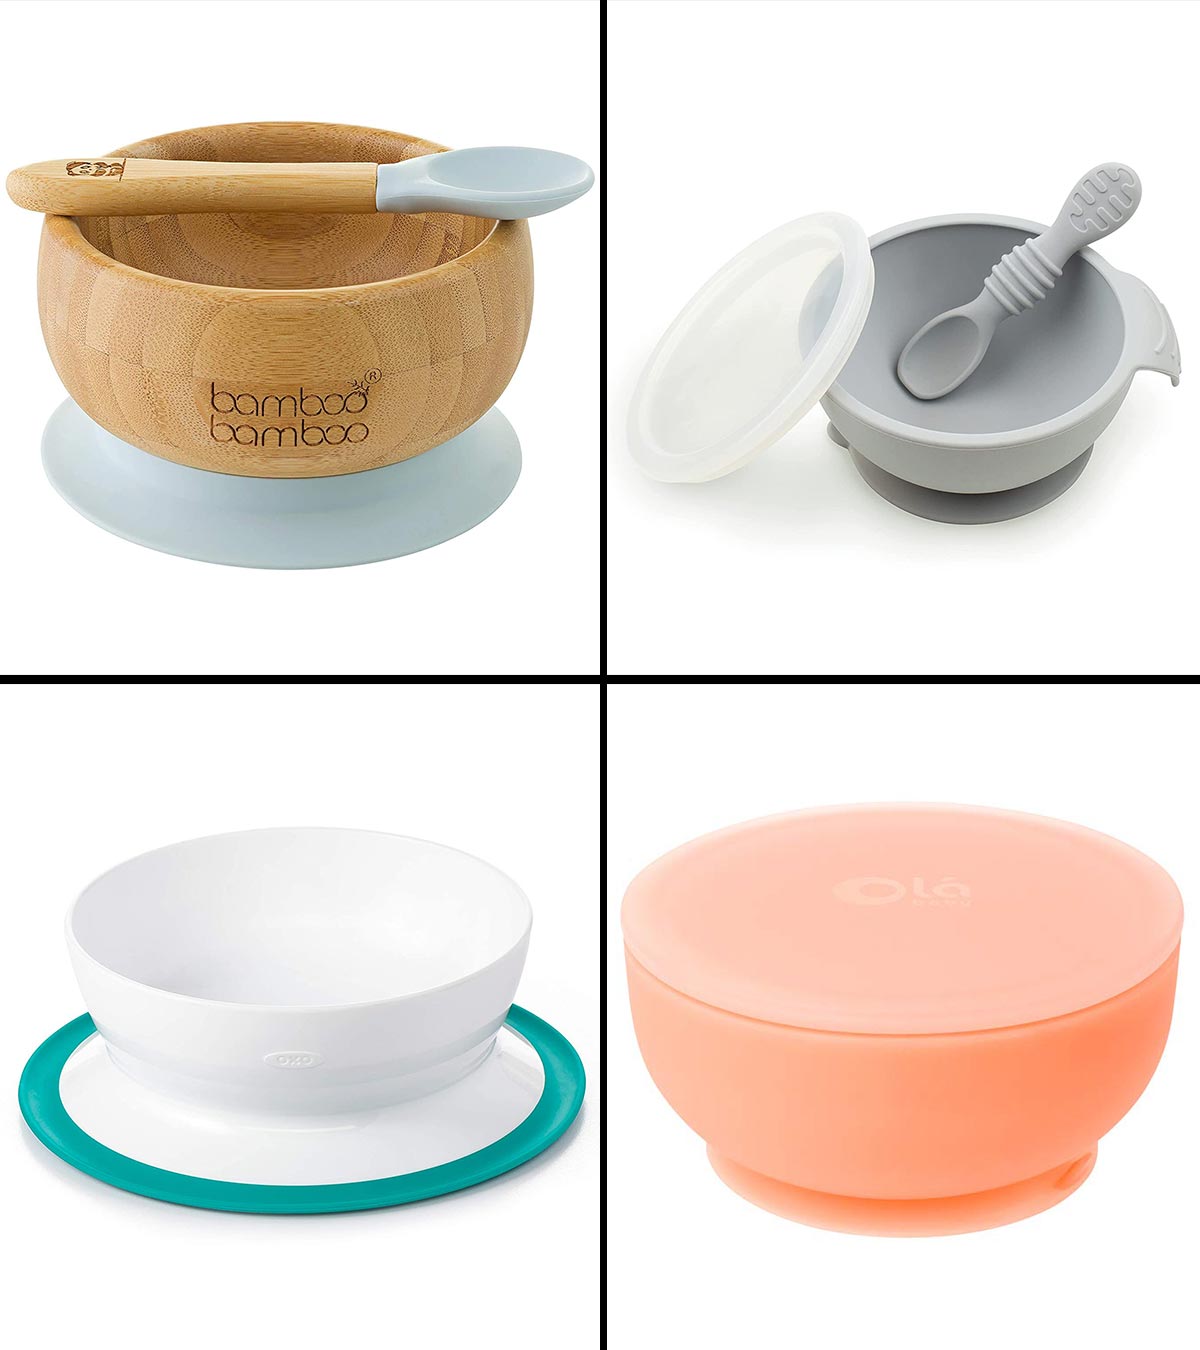 Best Bowls and Plates for Babies of 2023